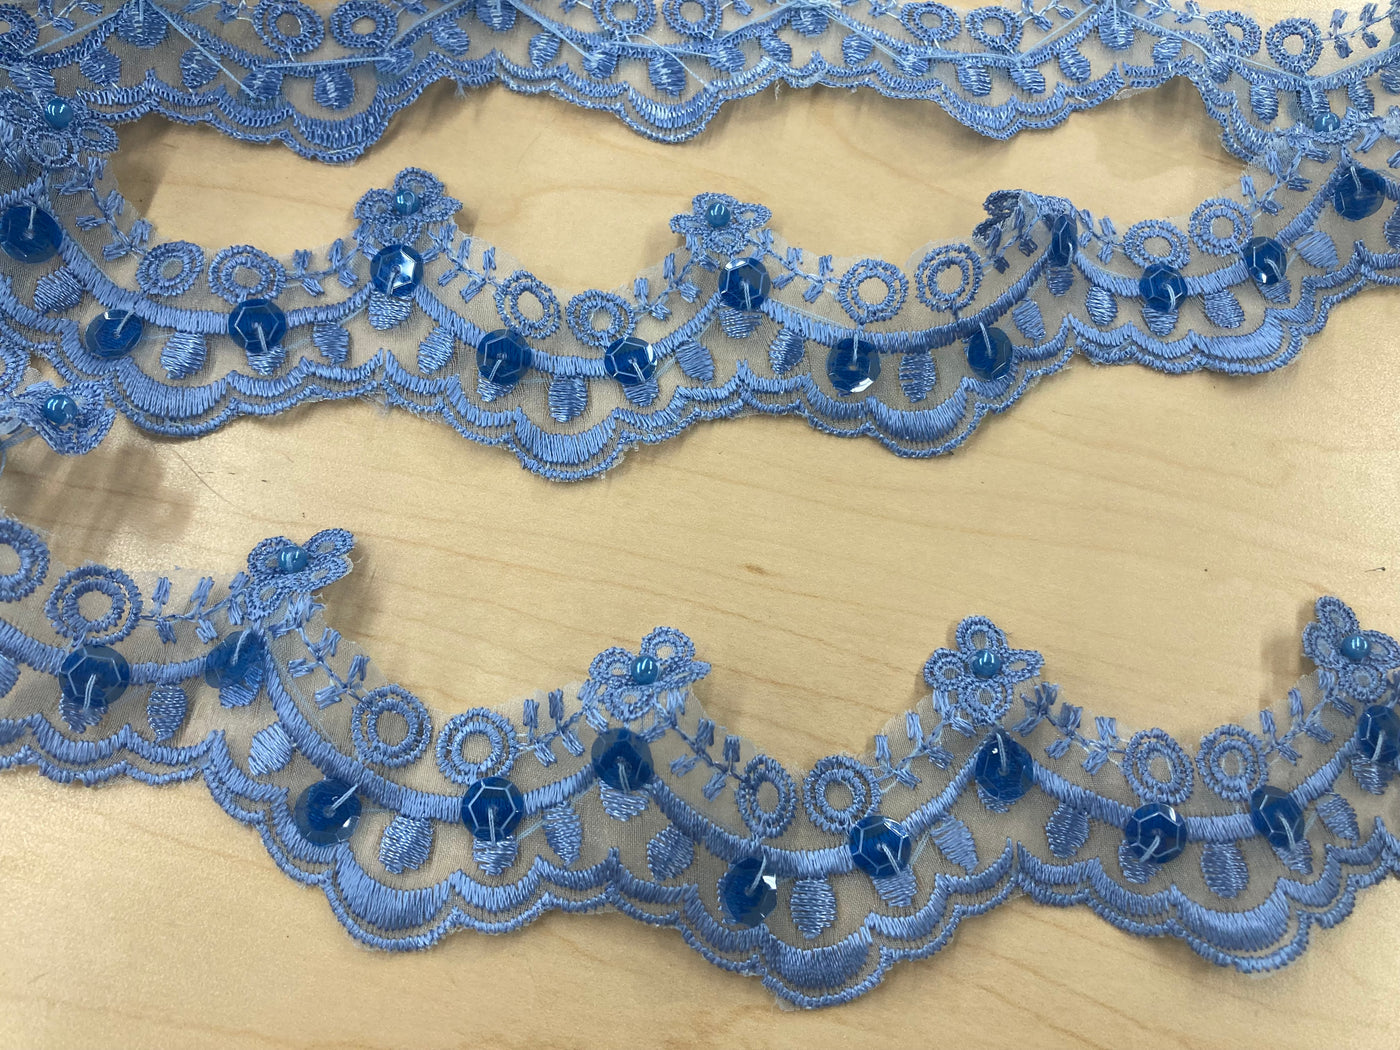 Beaded Perry Lace Trim Embroidered on 100% Polyester Organza . Large Arch Scalloped Trim. Formal Trim. Perfect for Edging and Gowns. Sold by the Yard. Lace Usa